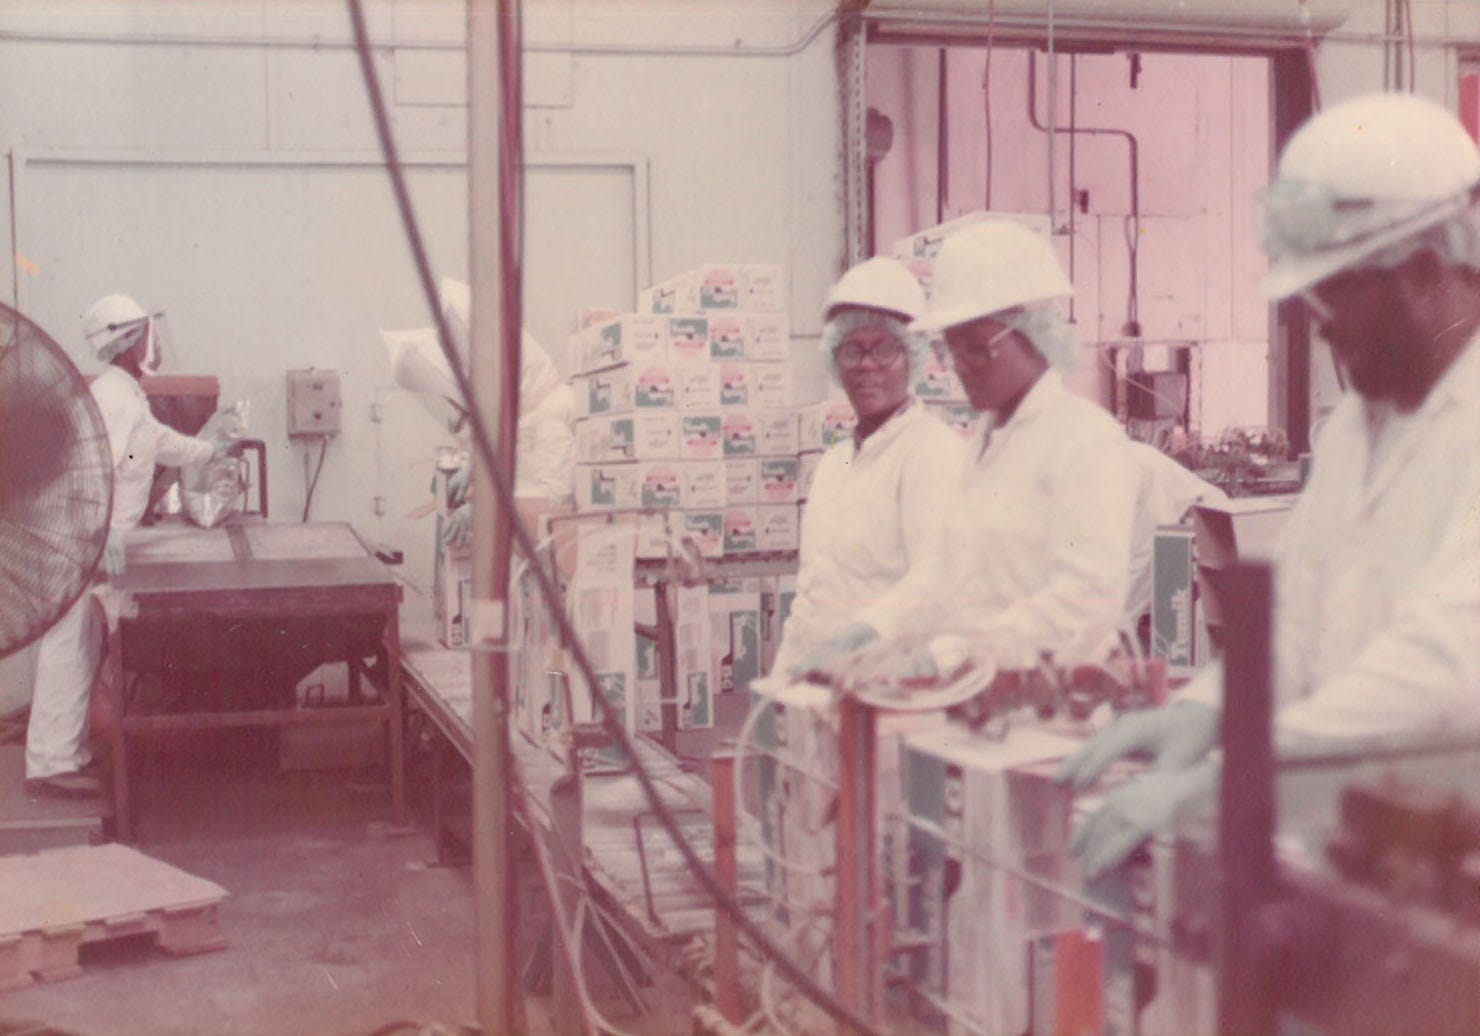 Workers on the assembly line in the Thiokol Chemical Corporation plant in Woodbine, Georgia, in the late 1960s.